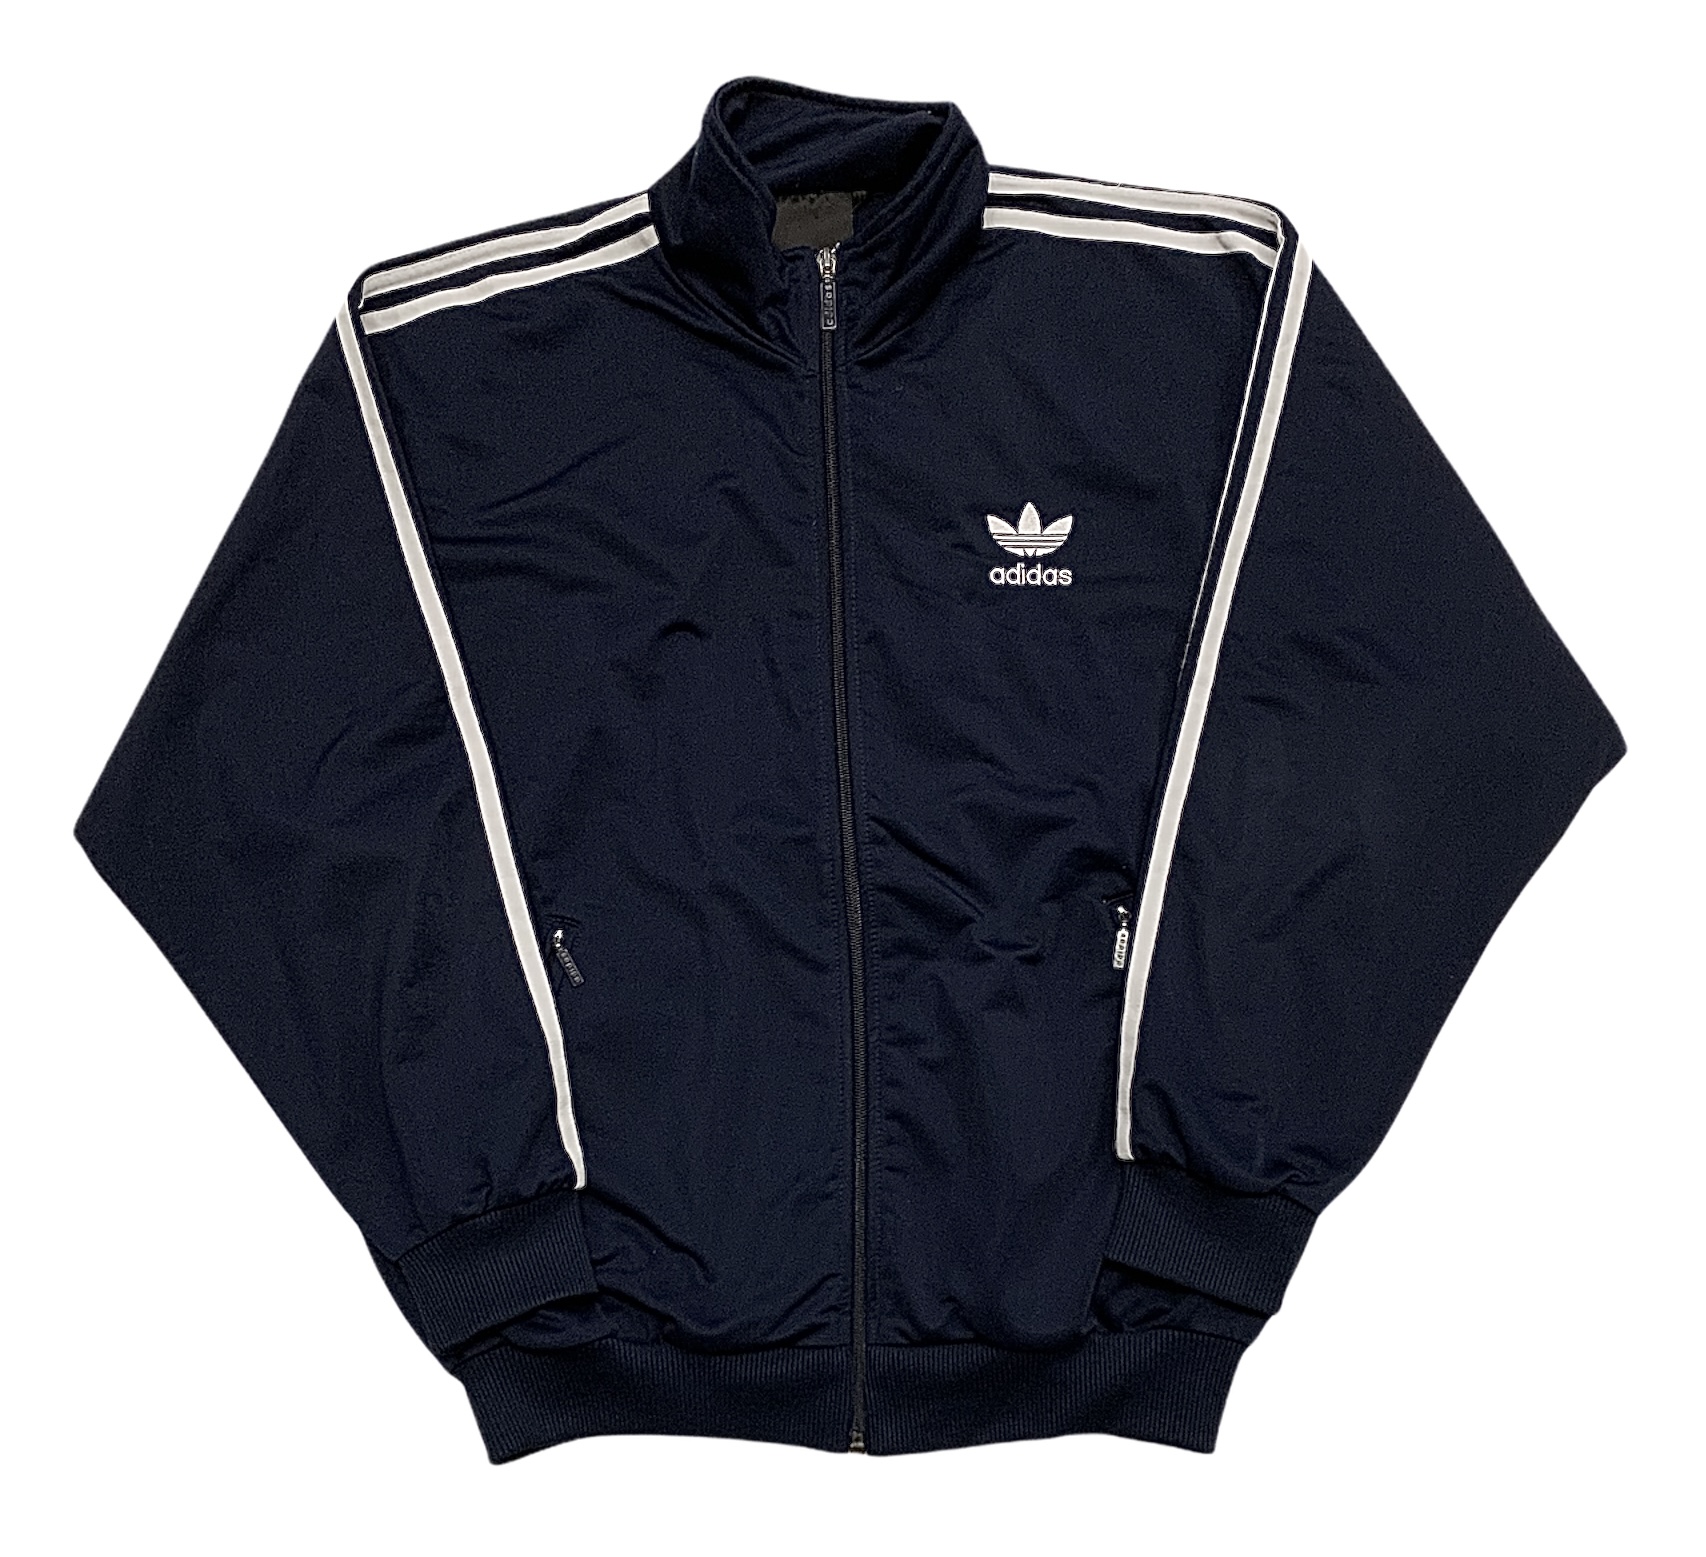 Adidas tracktop - Lowkey Archives